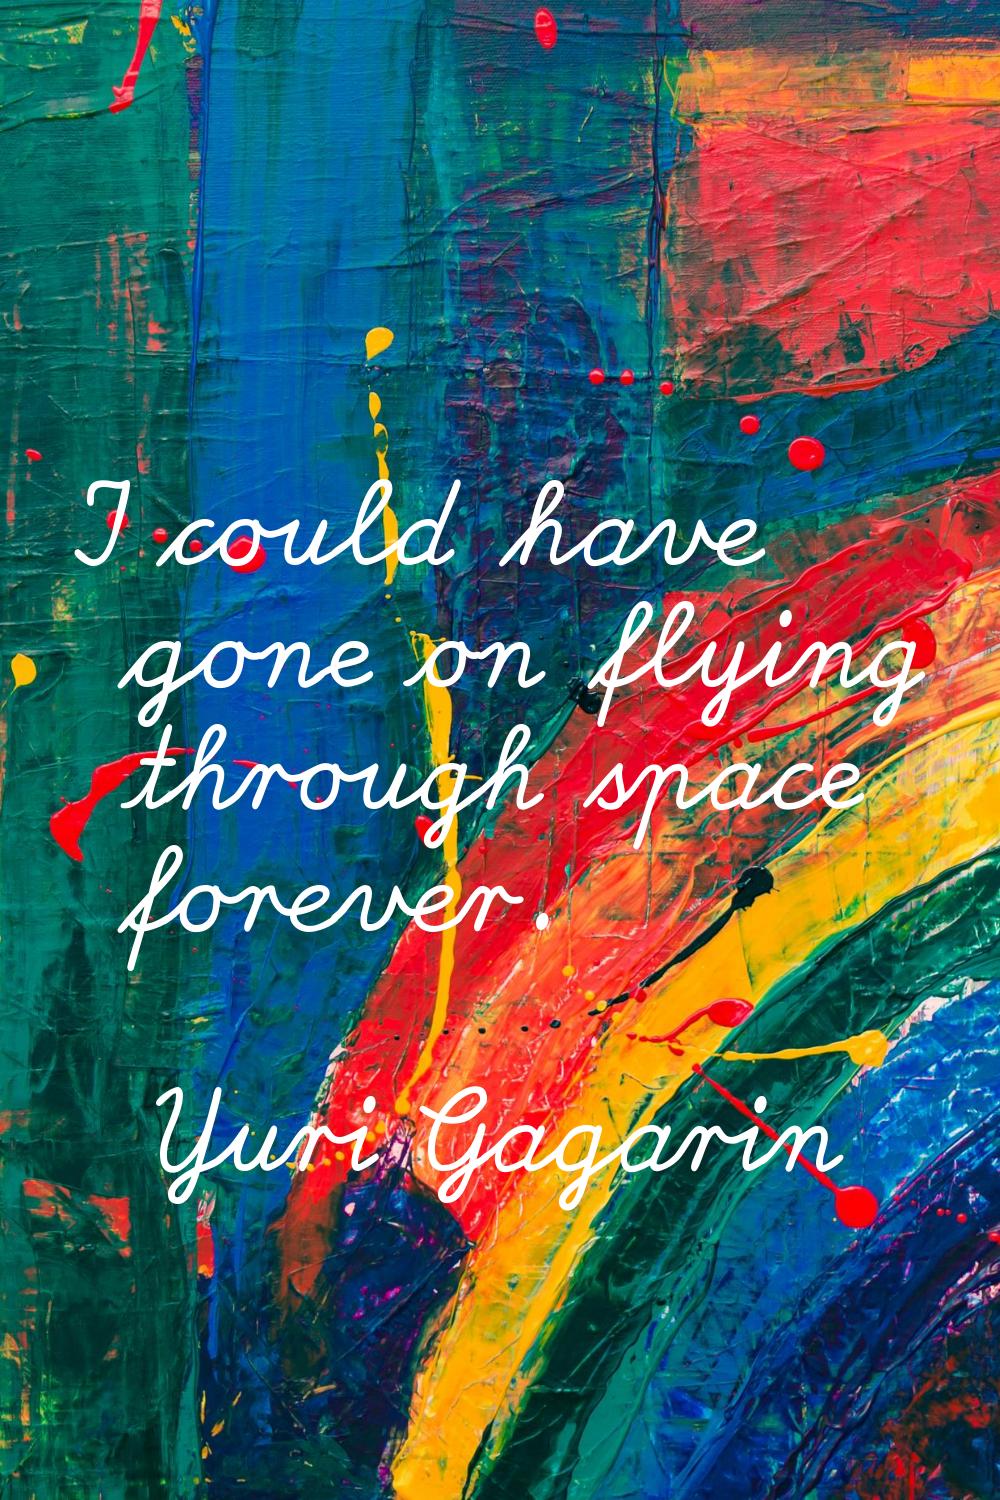 I could have gone on flying through space forever.